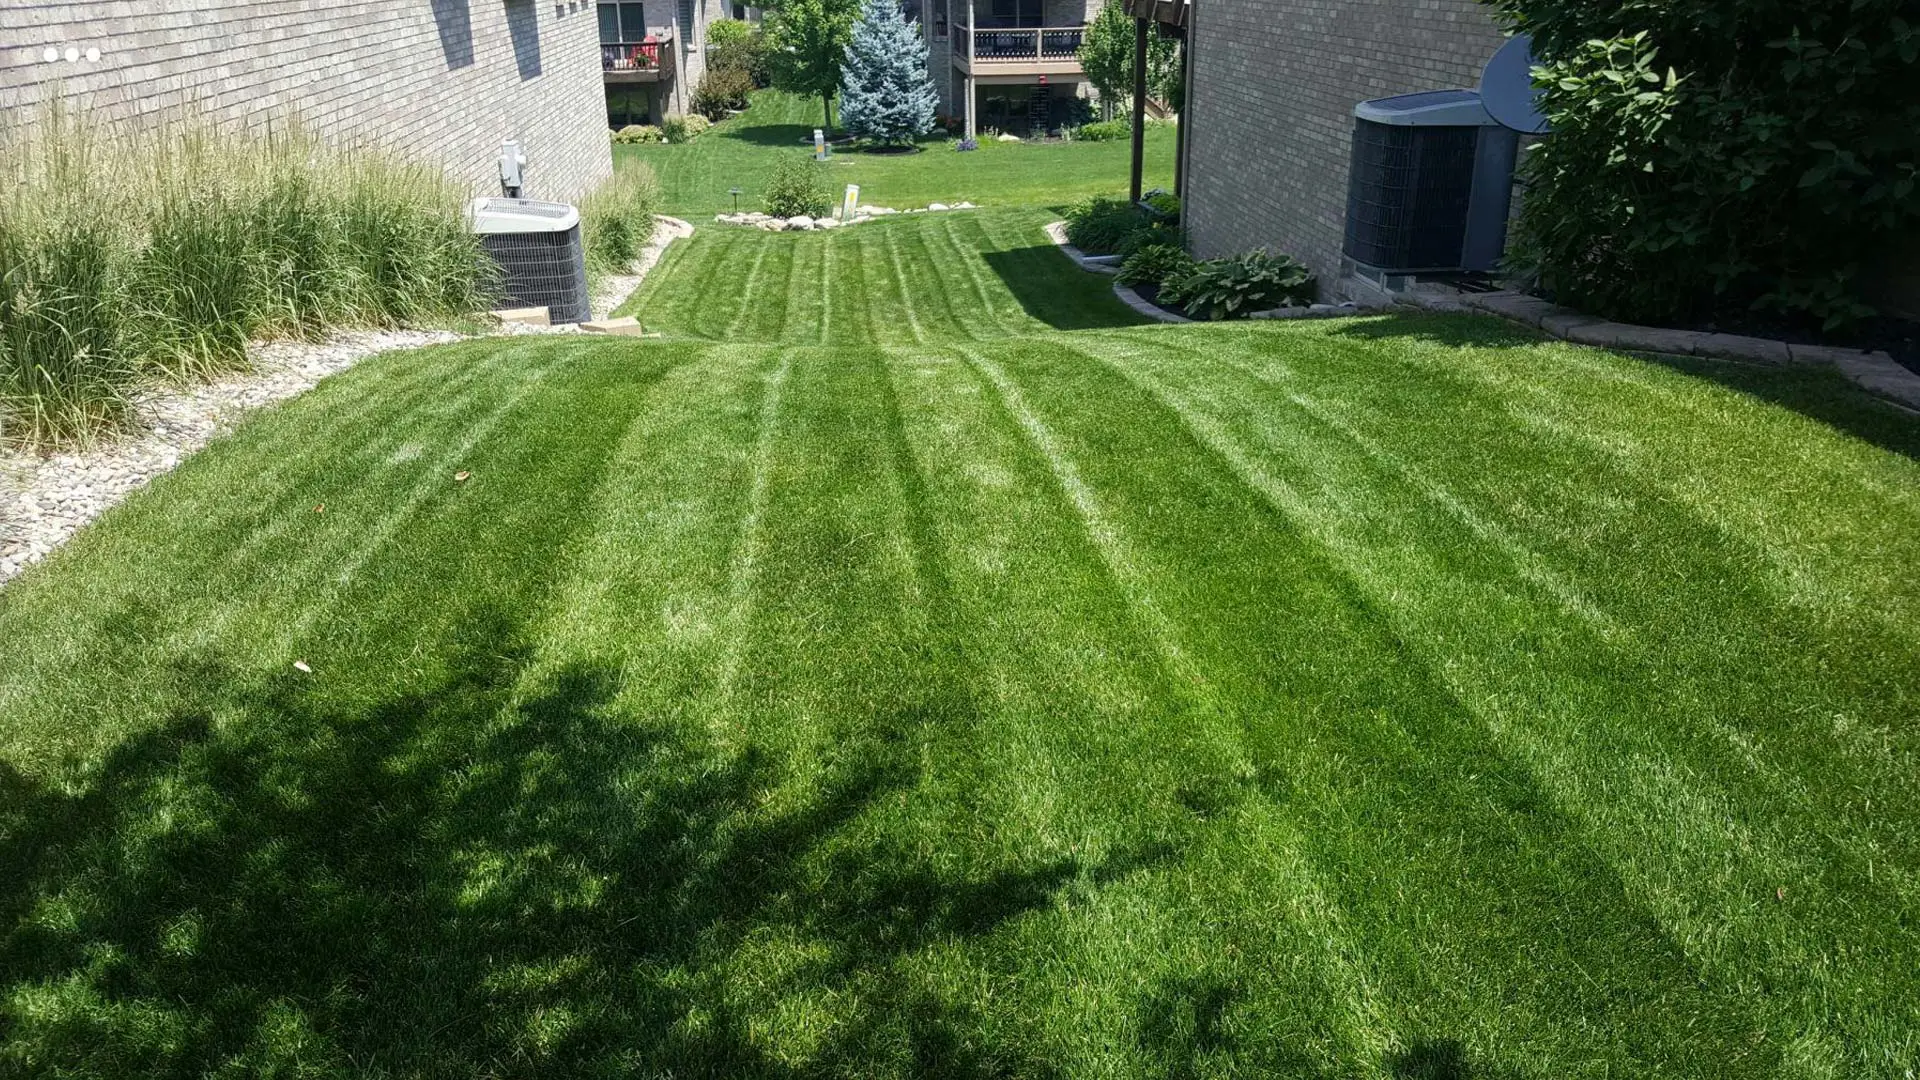 Healthy green lawn that was recently mowed at a home in Lincoln.